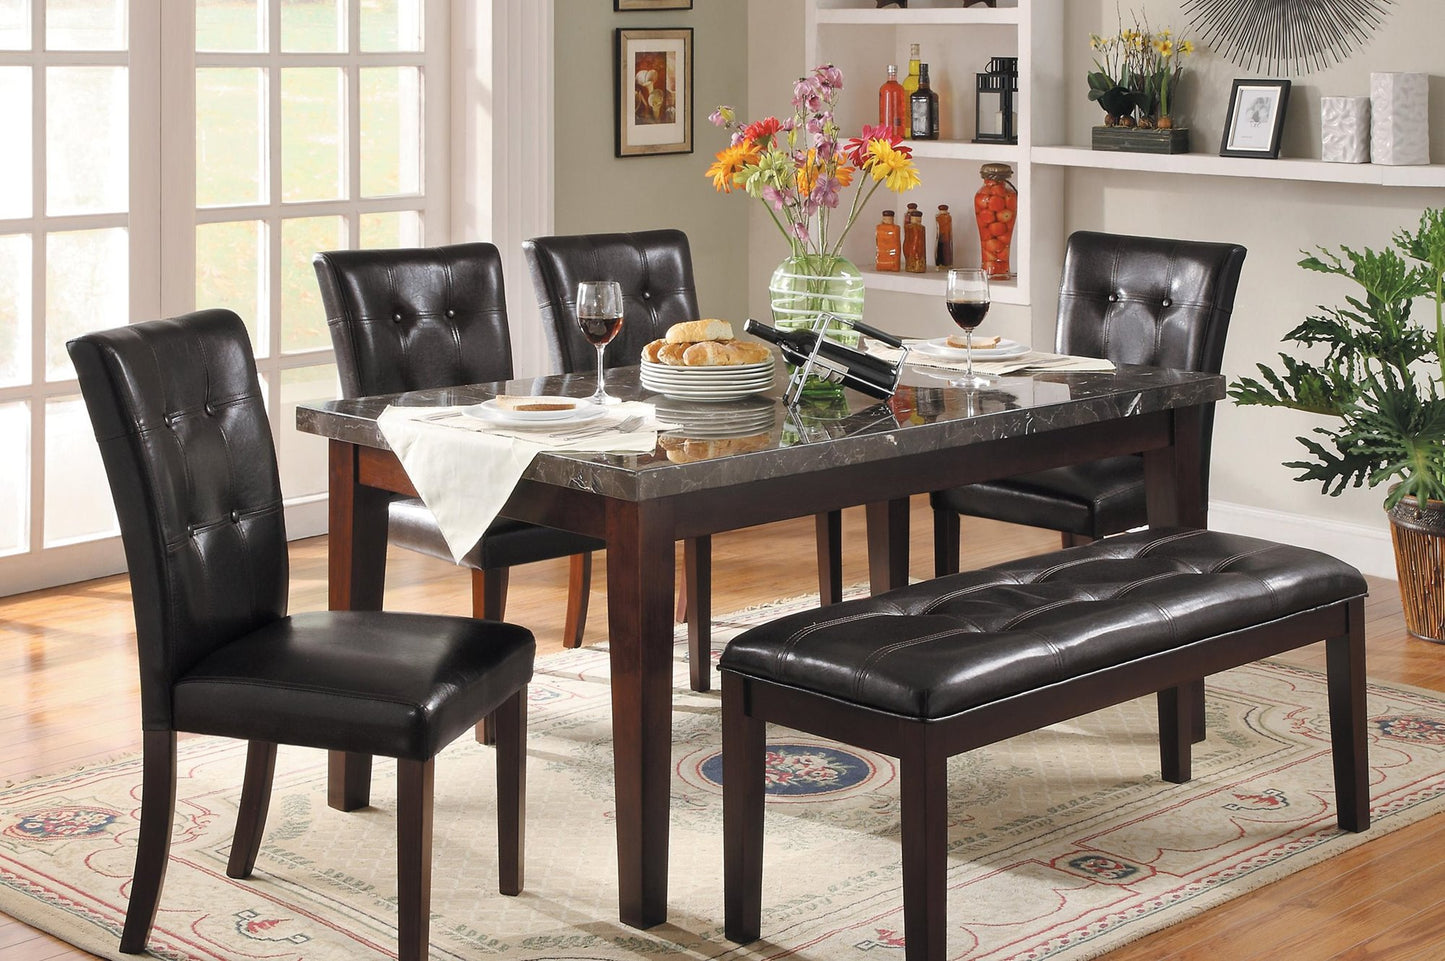 Homelegance Decatur Dining Bench in Espresso Leatherette